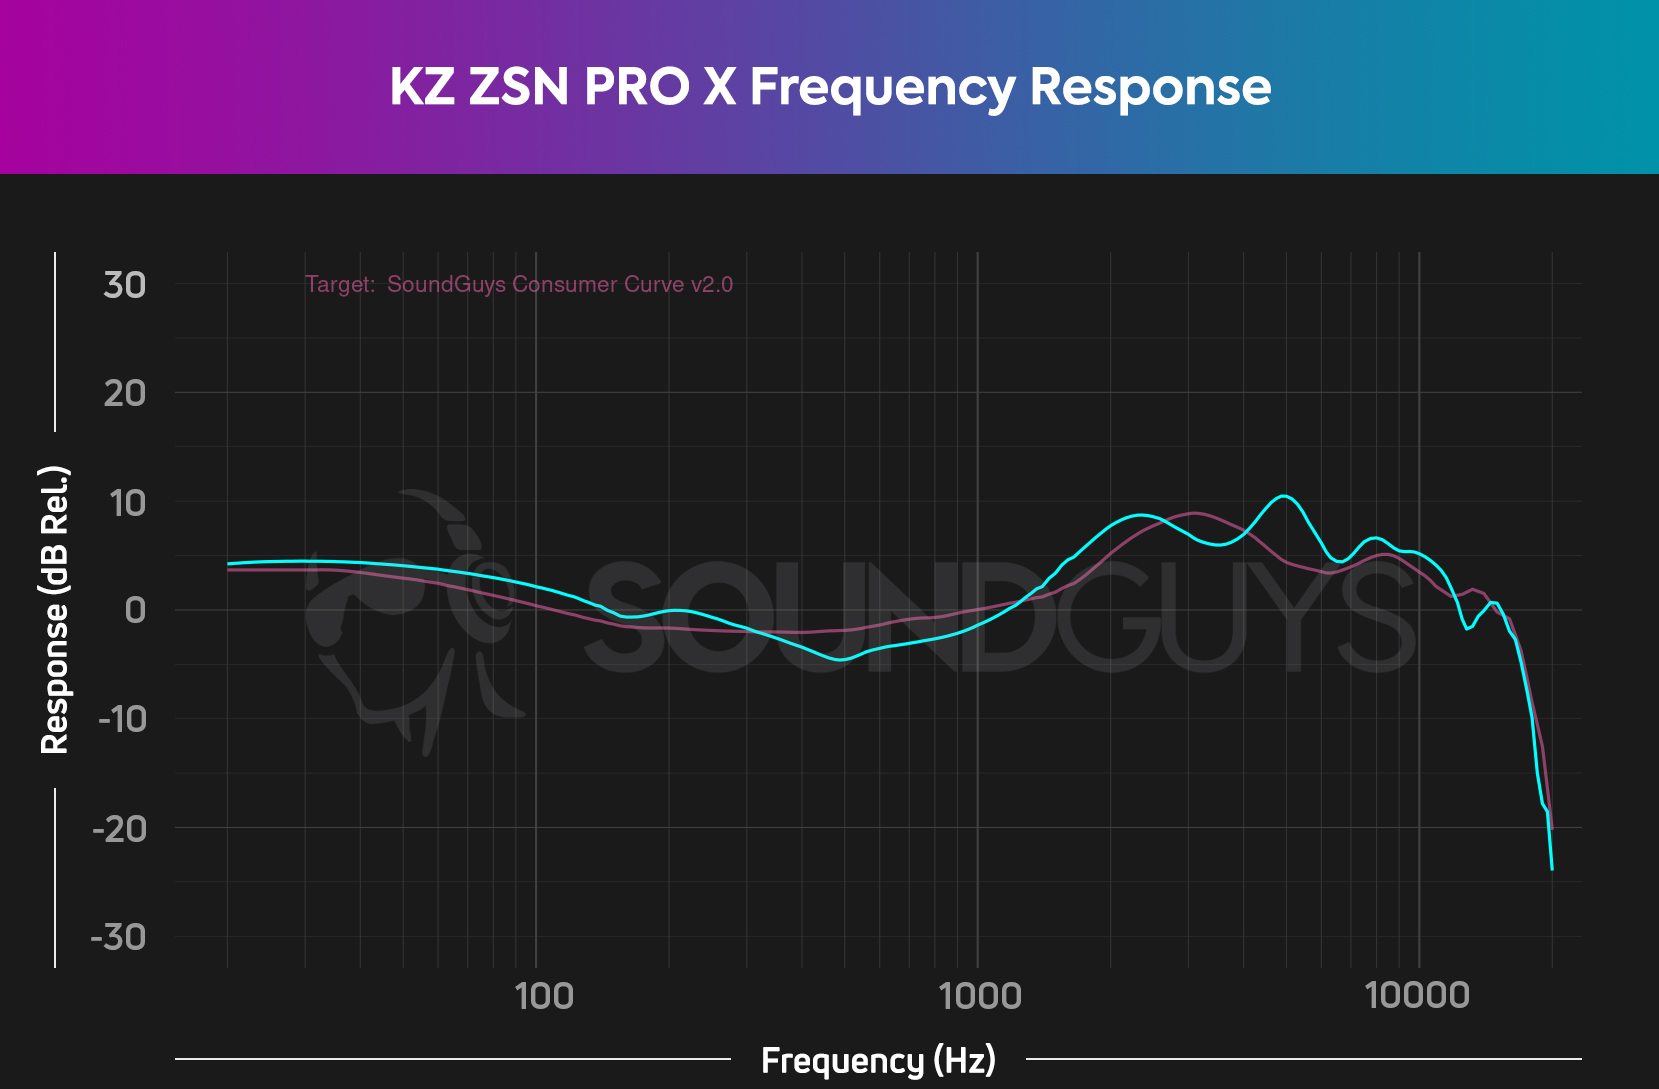 Chart depicts the KZ ZSN PRO X frequency response compared to our house curve.